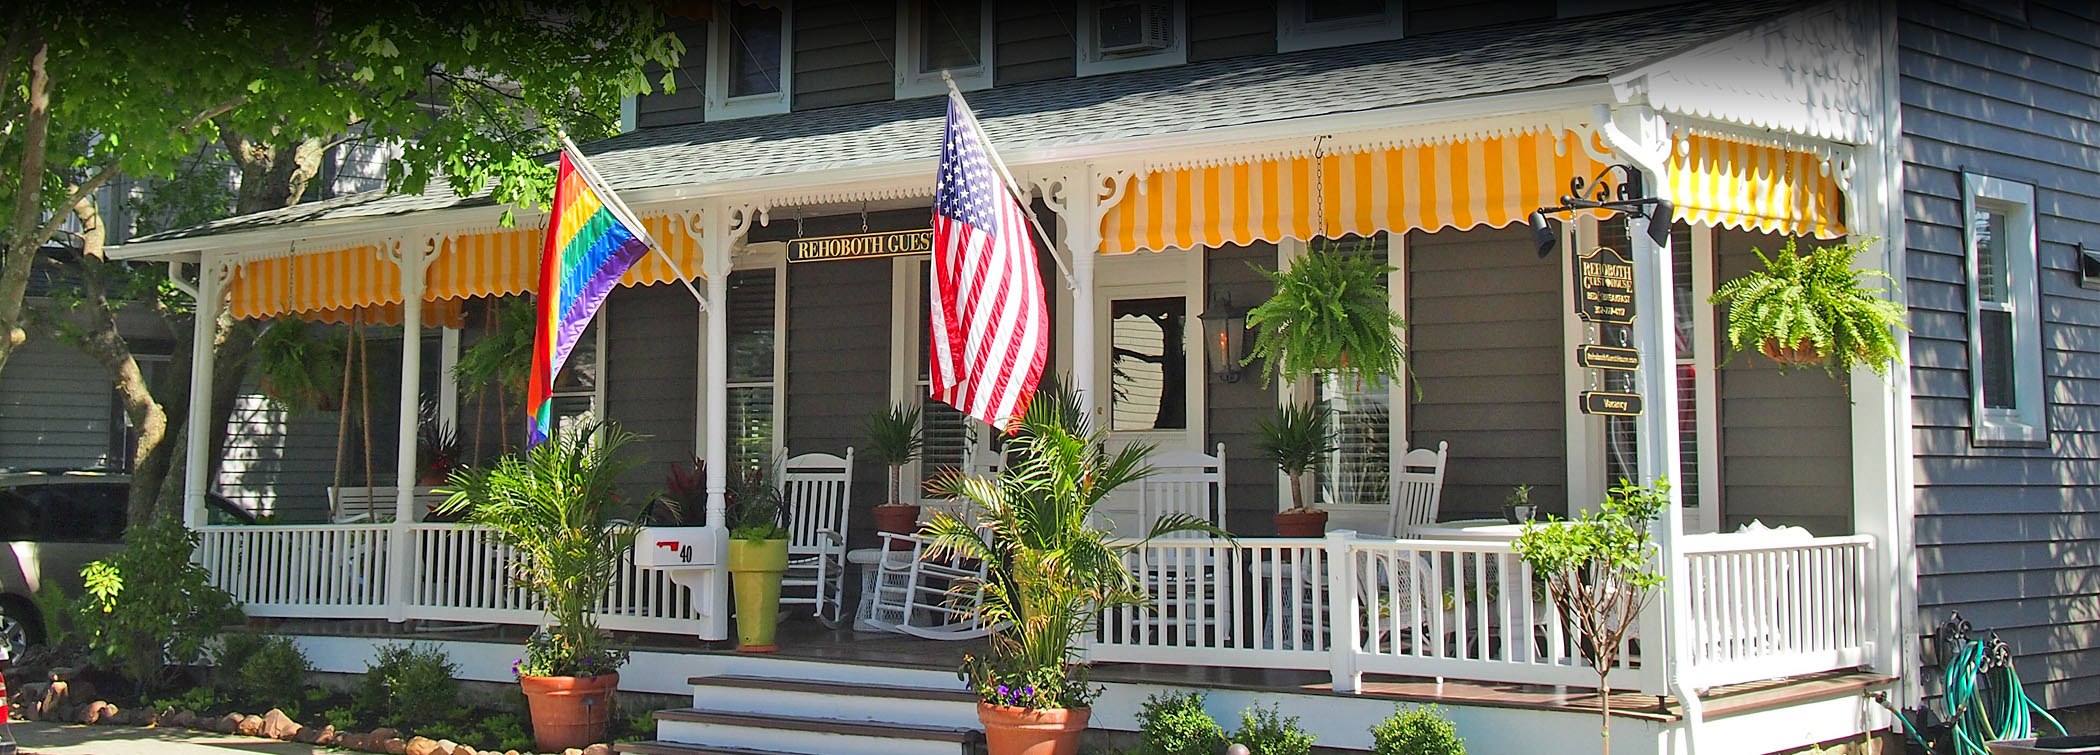 Rehoboth Guest House Front